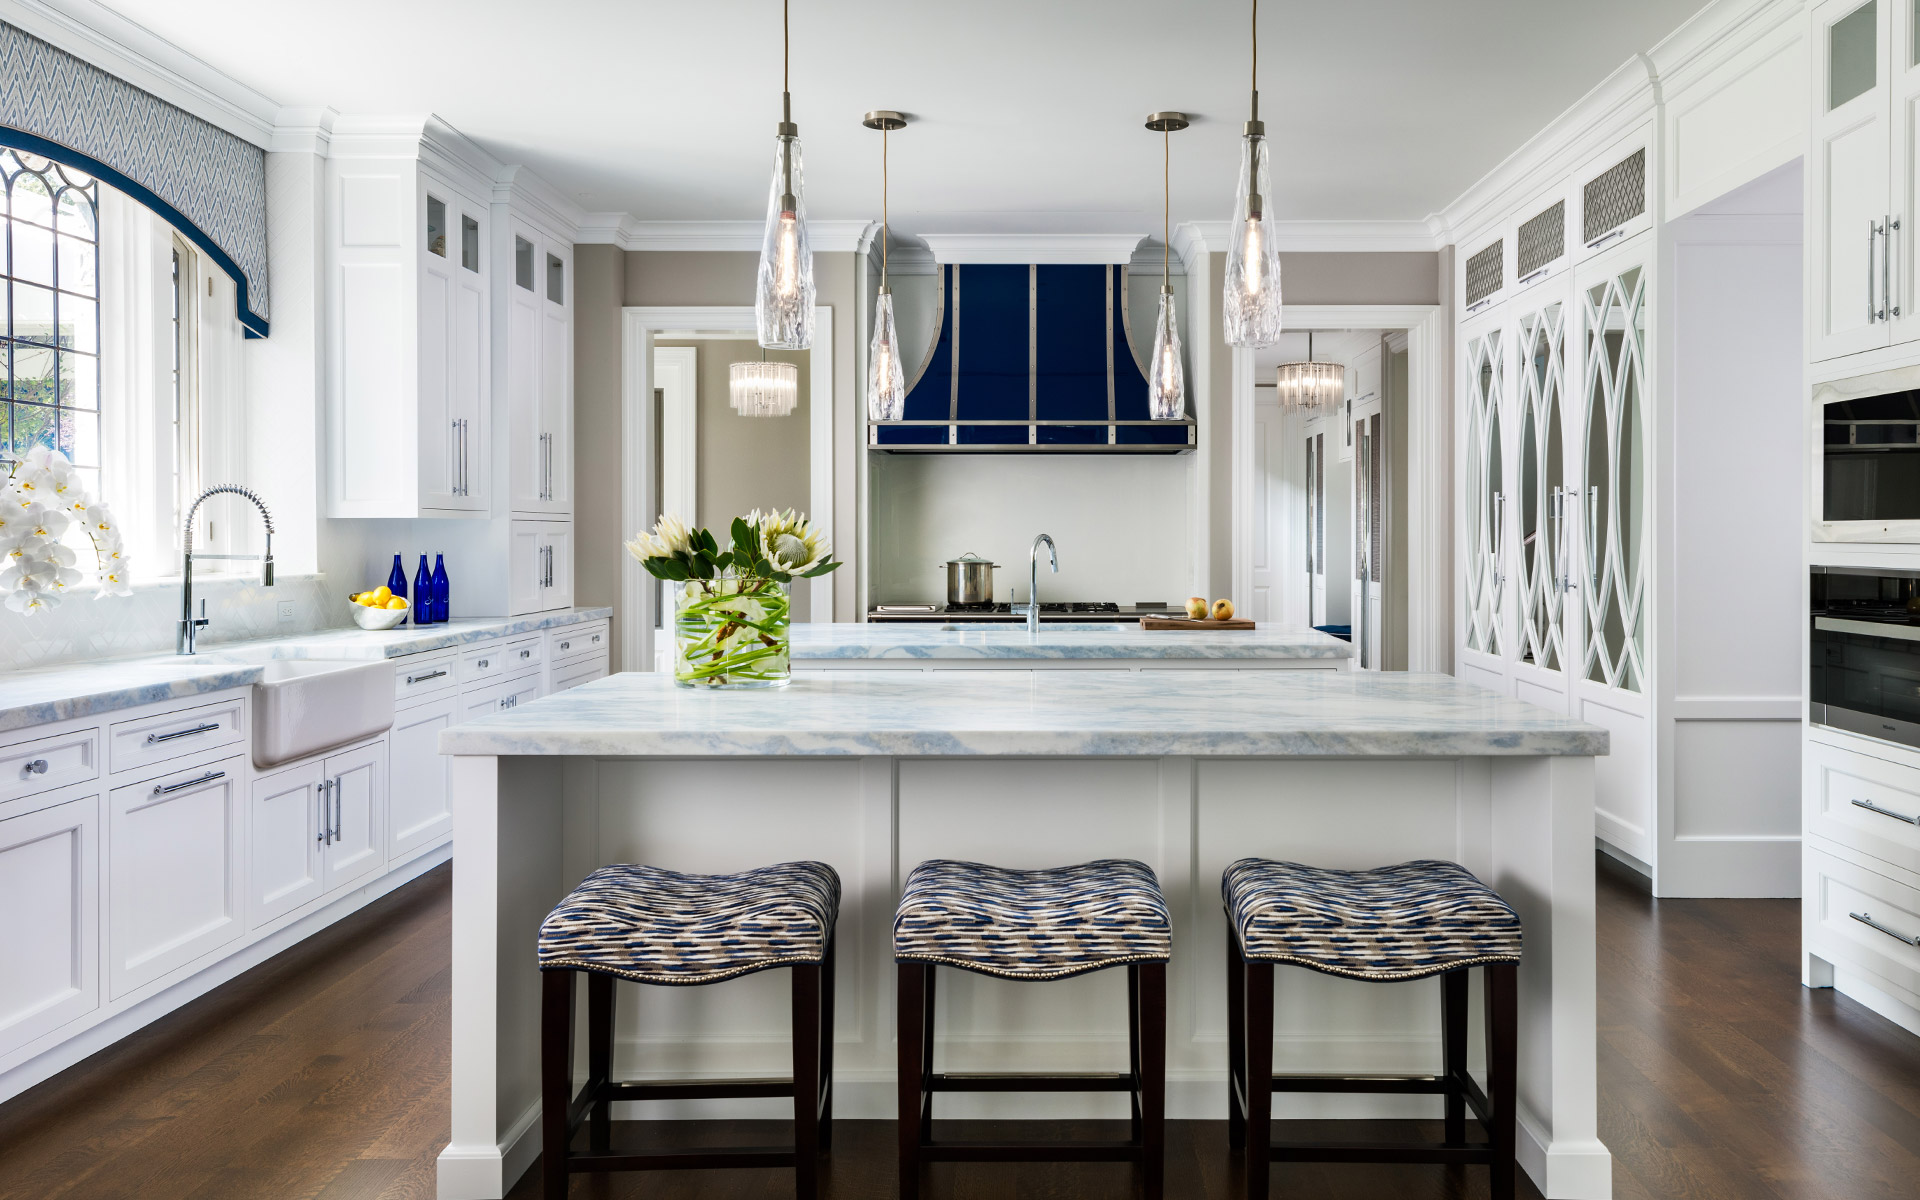 DEANE has deep expertise in transitional kitchen design.